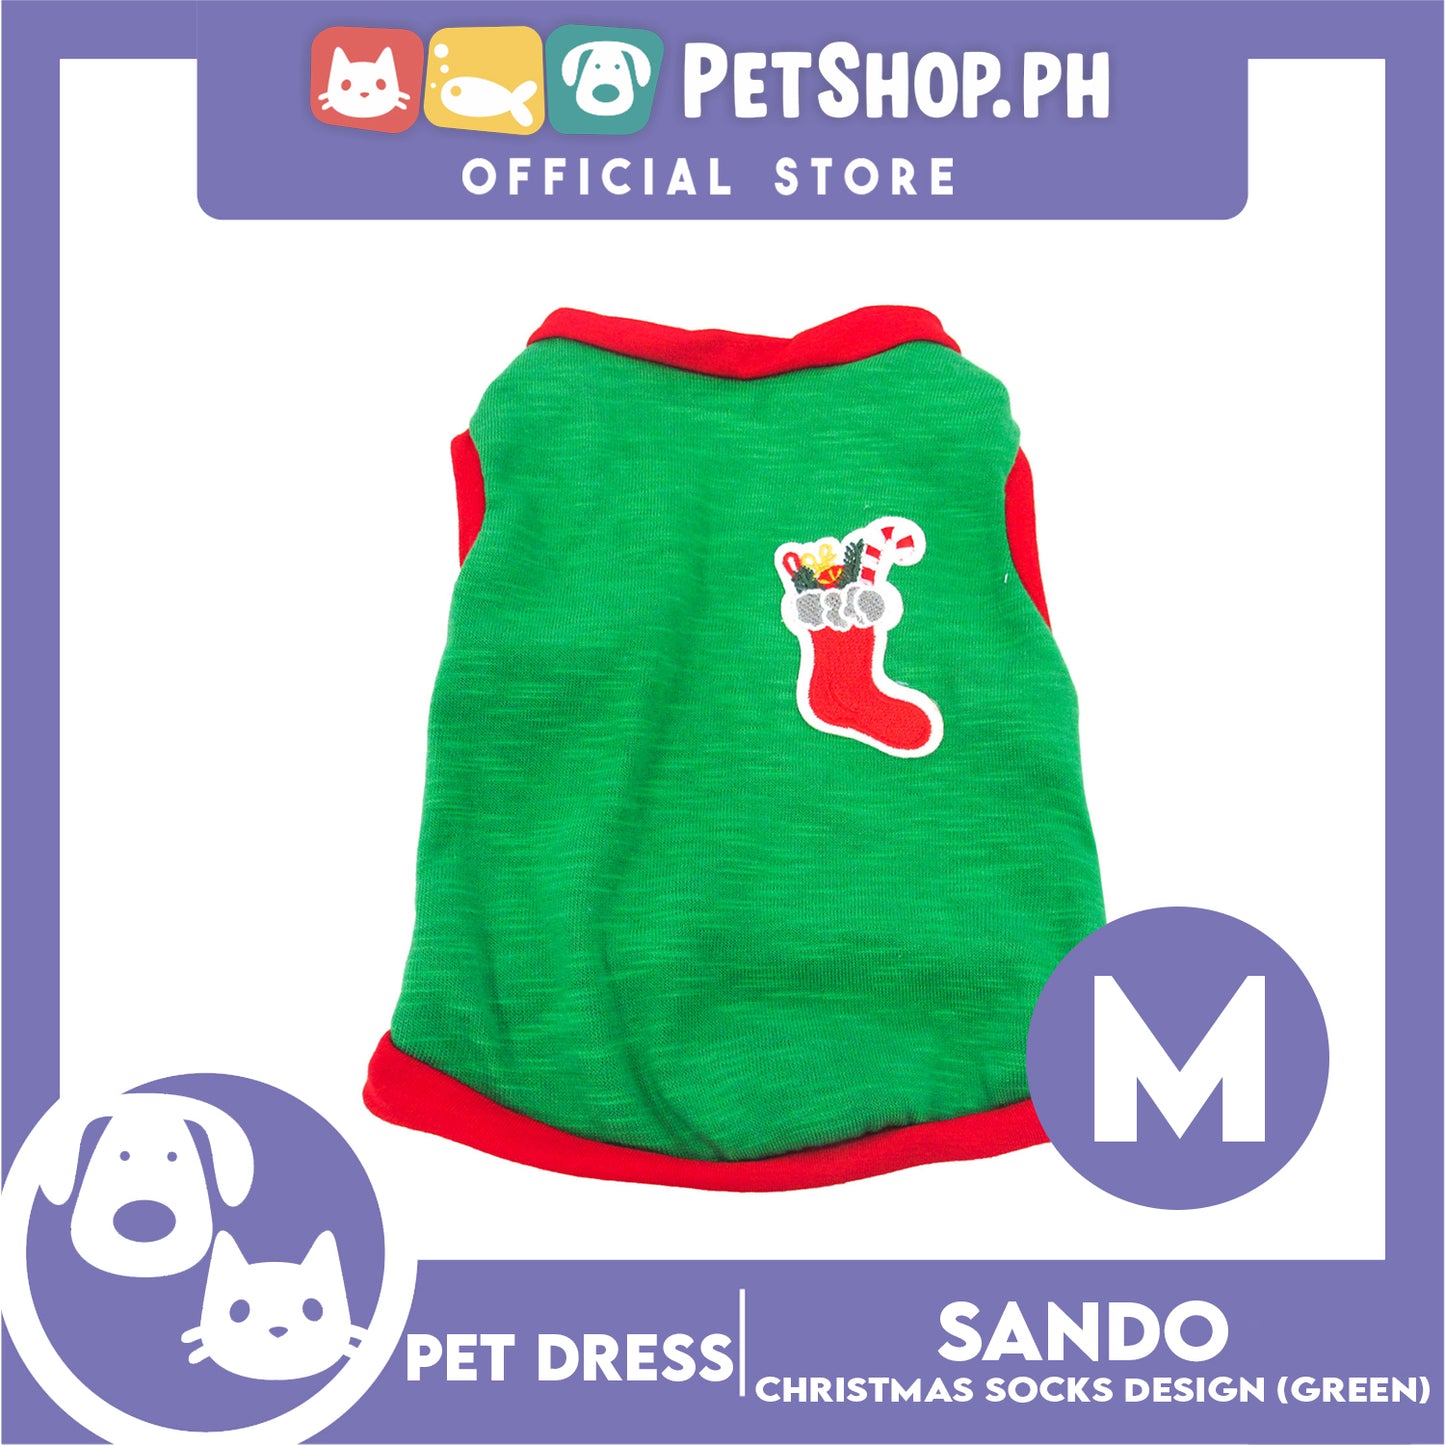 Pet Shirt (Medium) Christmas Stocking with Red Piping Sleeveless for Puppy, Small Dog & Cats- Sando Breathable Clothes, Pet T-shirt, Sweat Shirt